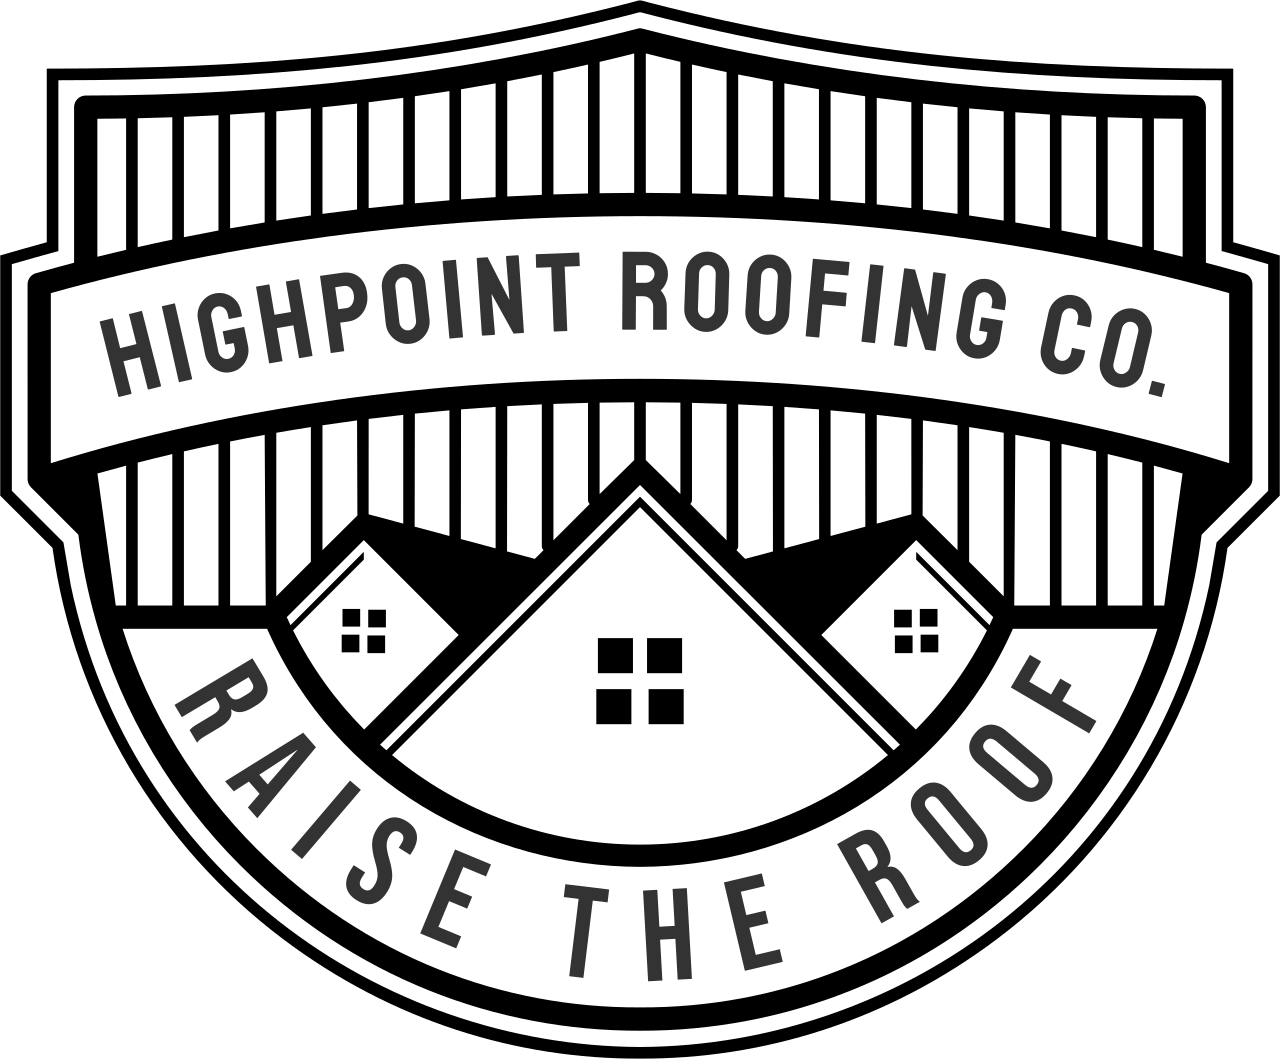 HighPoint Roofing Co.'s web page